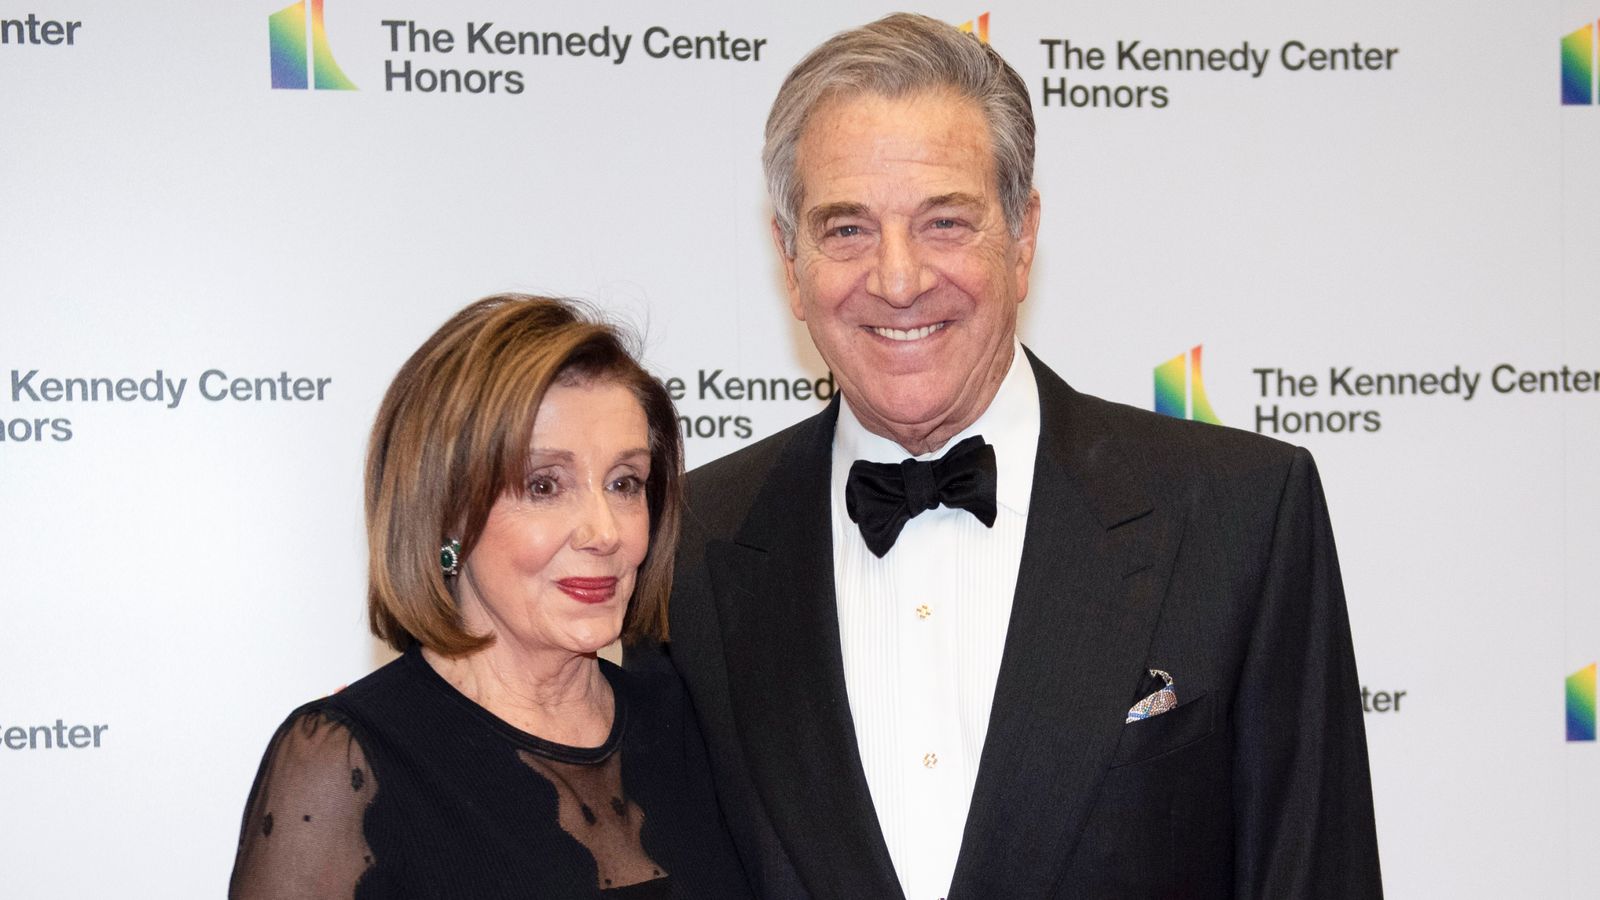 Husband of US House Speaker Nancy Pelosi violently assaulted after break-in at their home